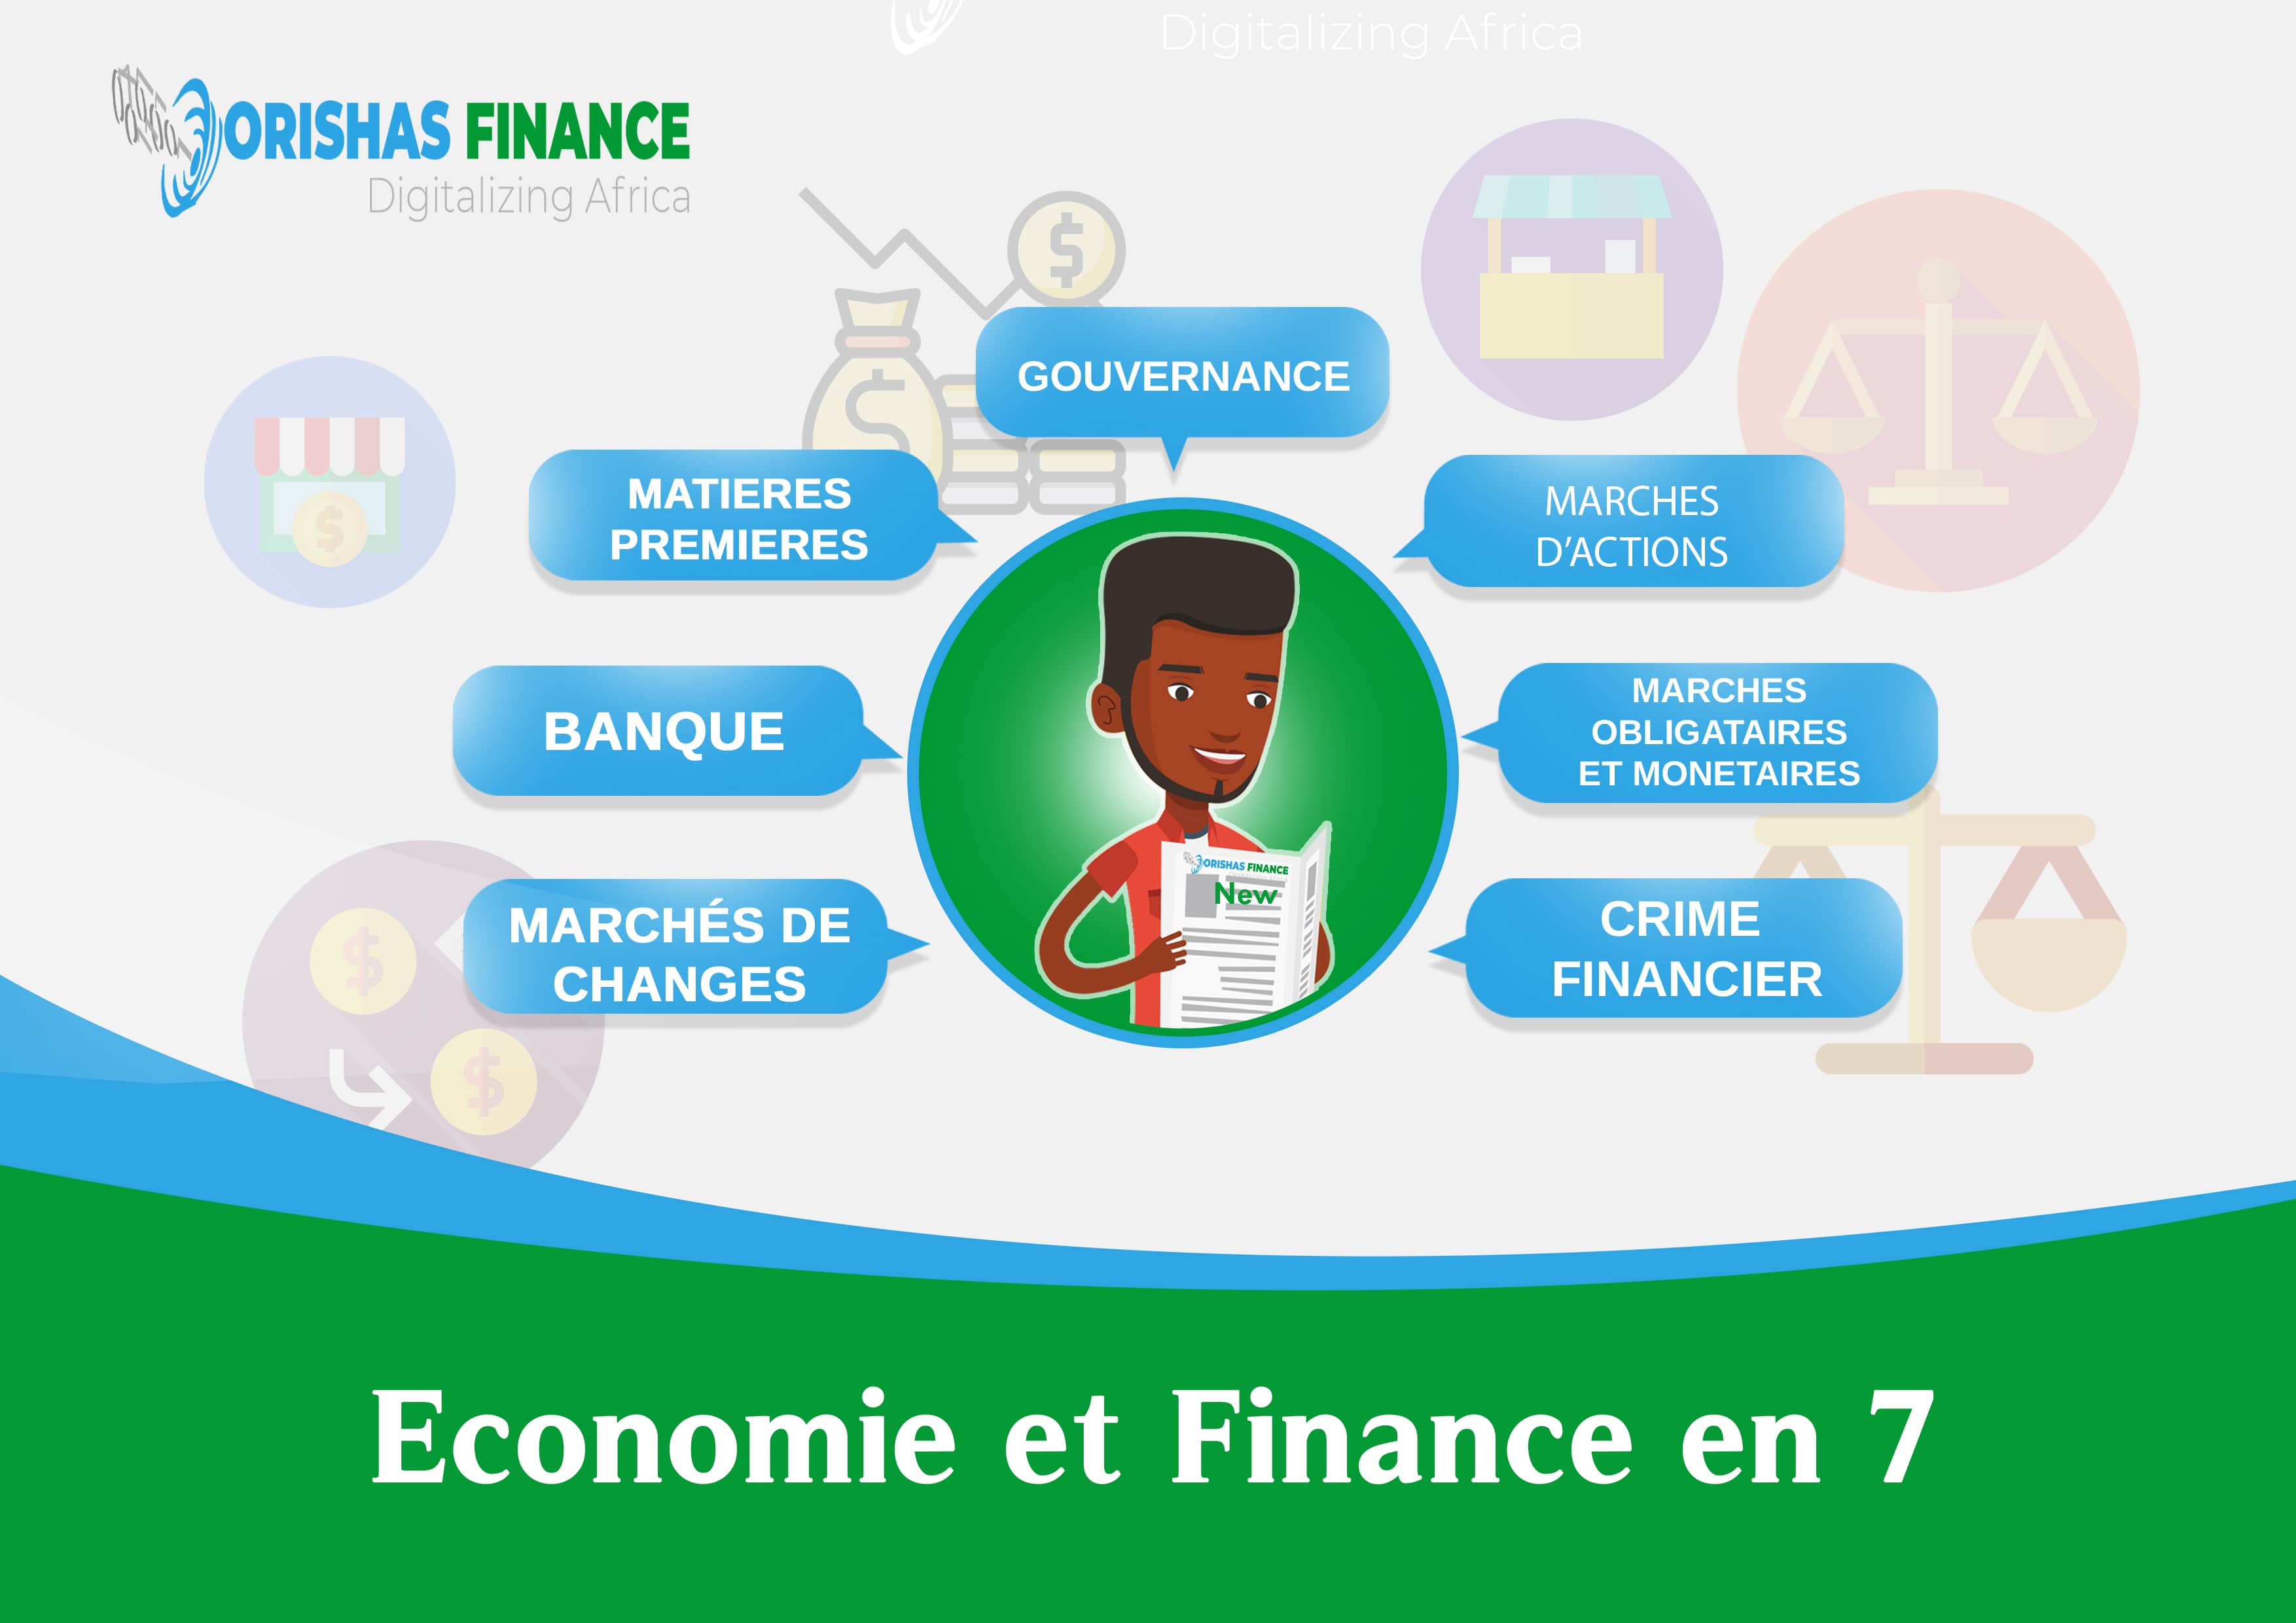  Economy and finance in 7 from April 19 to 23, 2021 